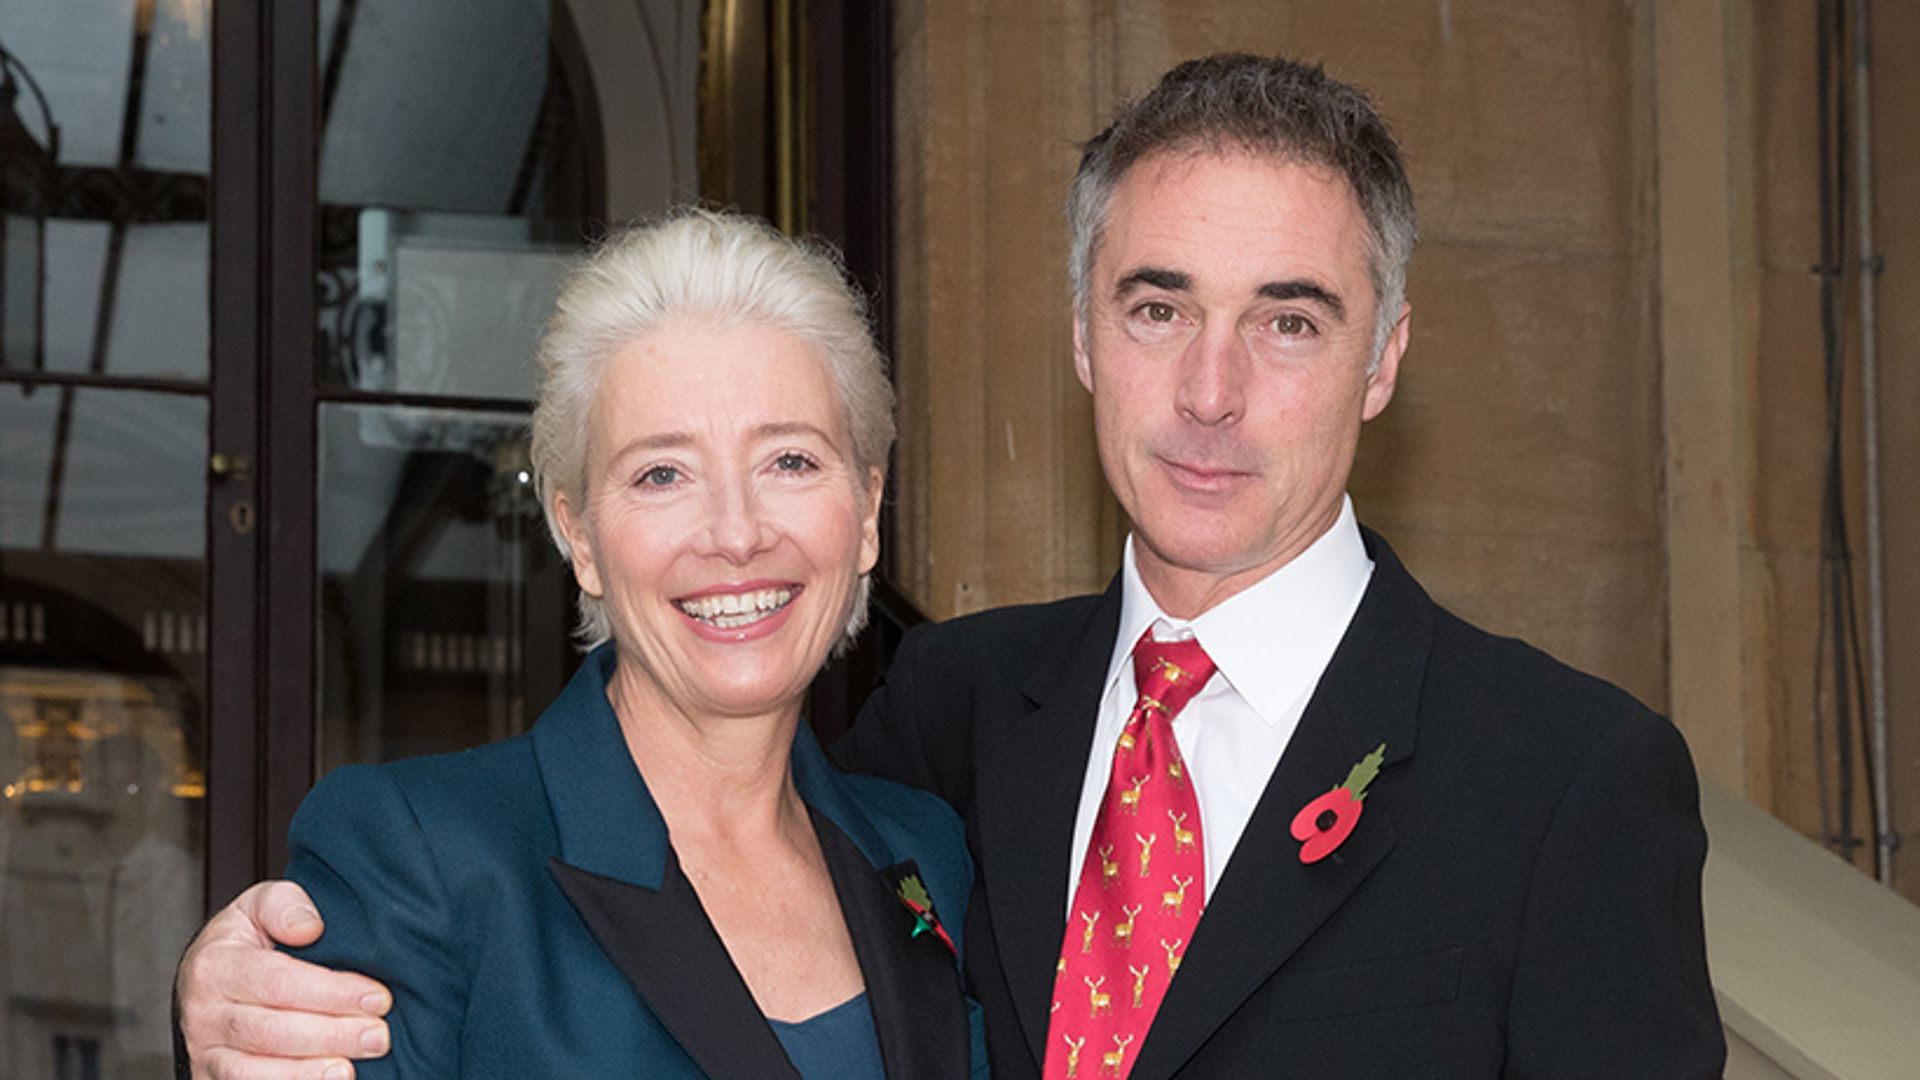 Emma Thompson is chic in teal trouser suit at Buckingham Palace